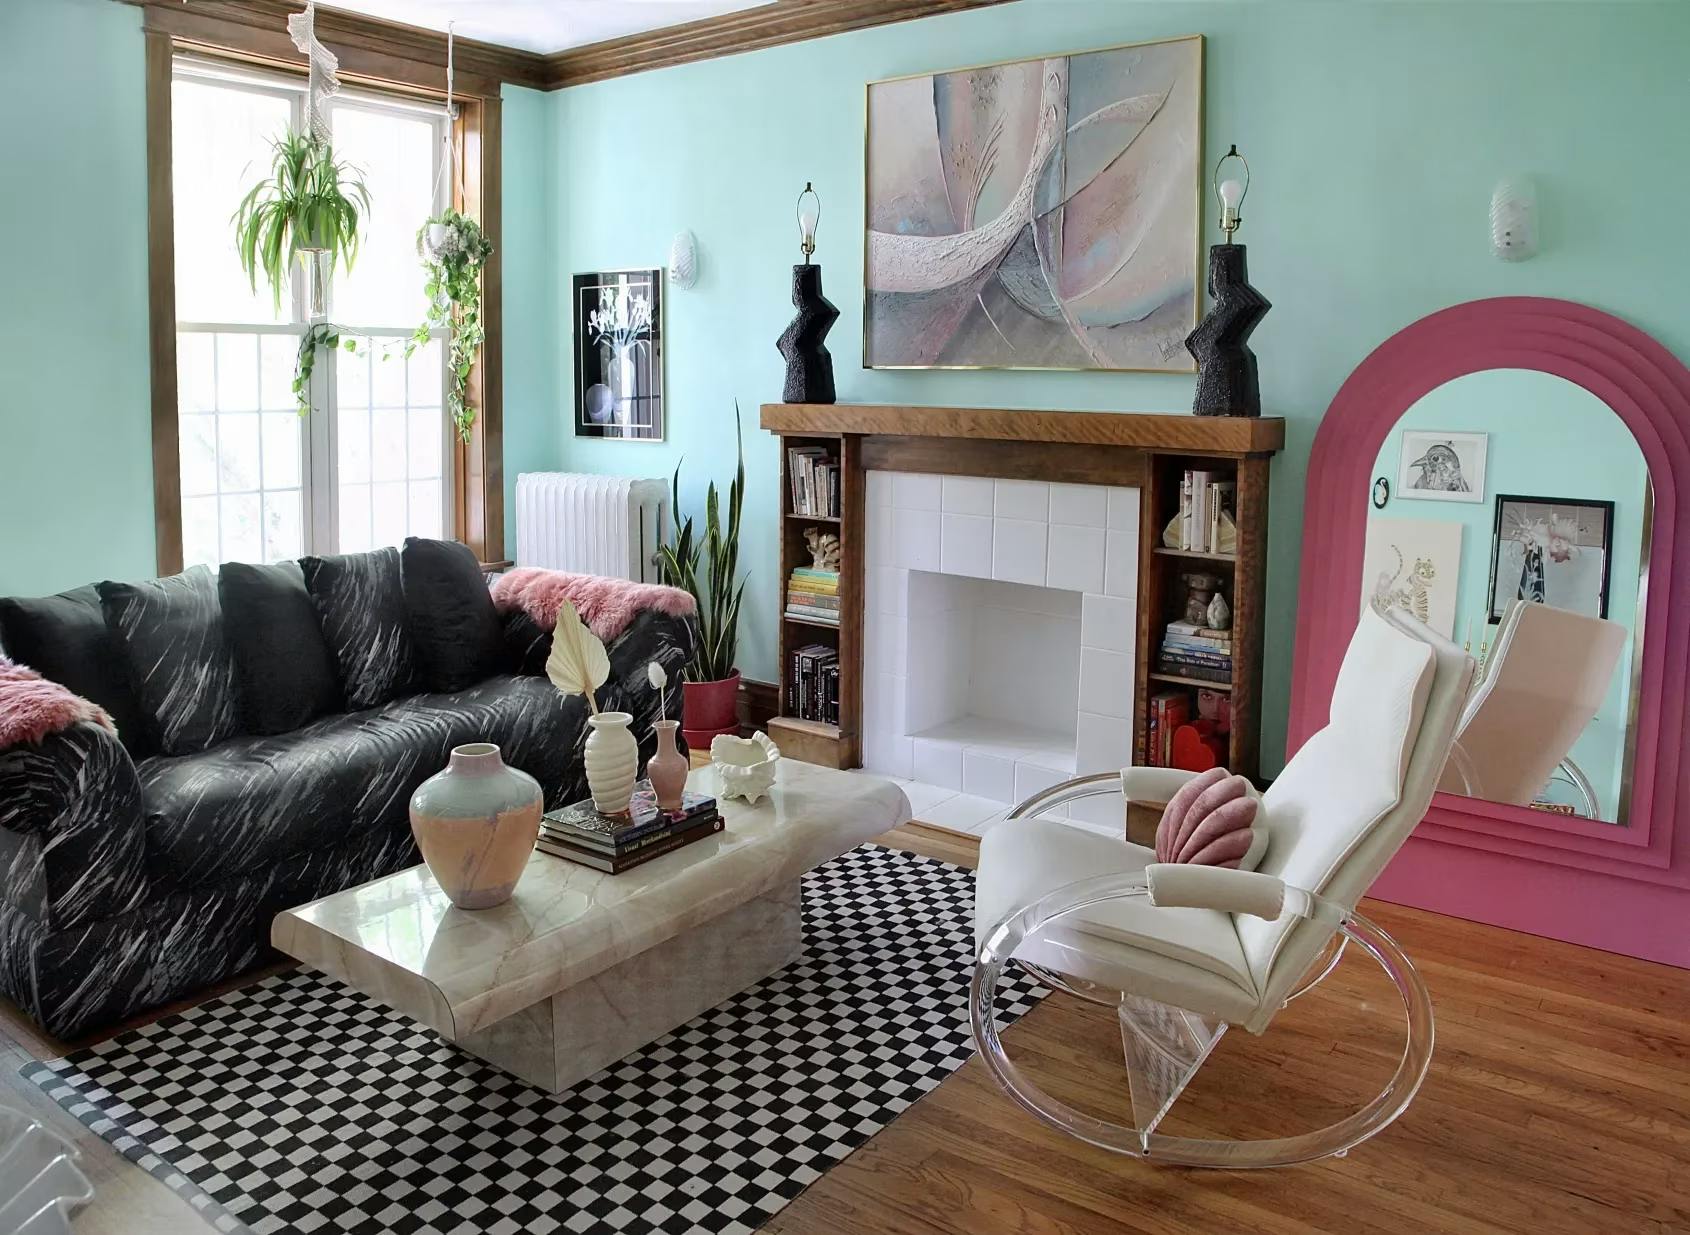 Seafoam Pearl by Behr, featured by Apartment Therapy, photo by Barbie Roadkill